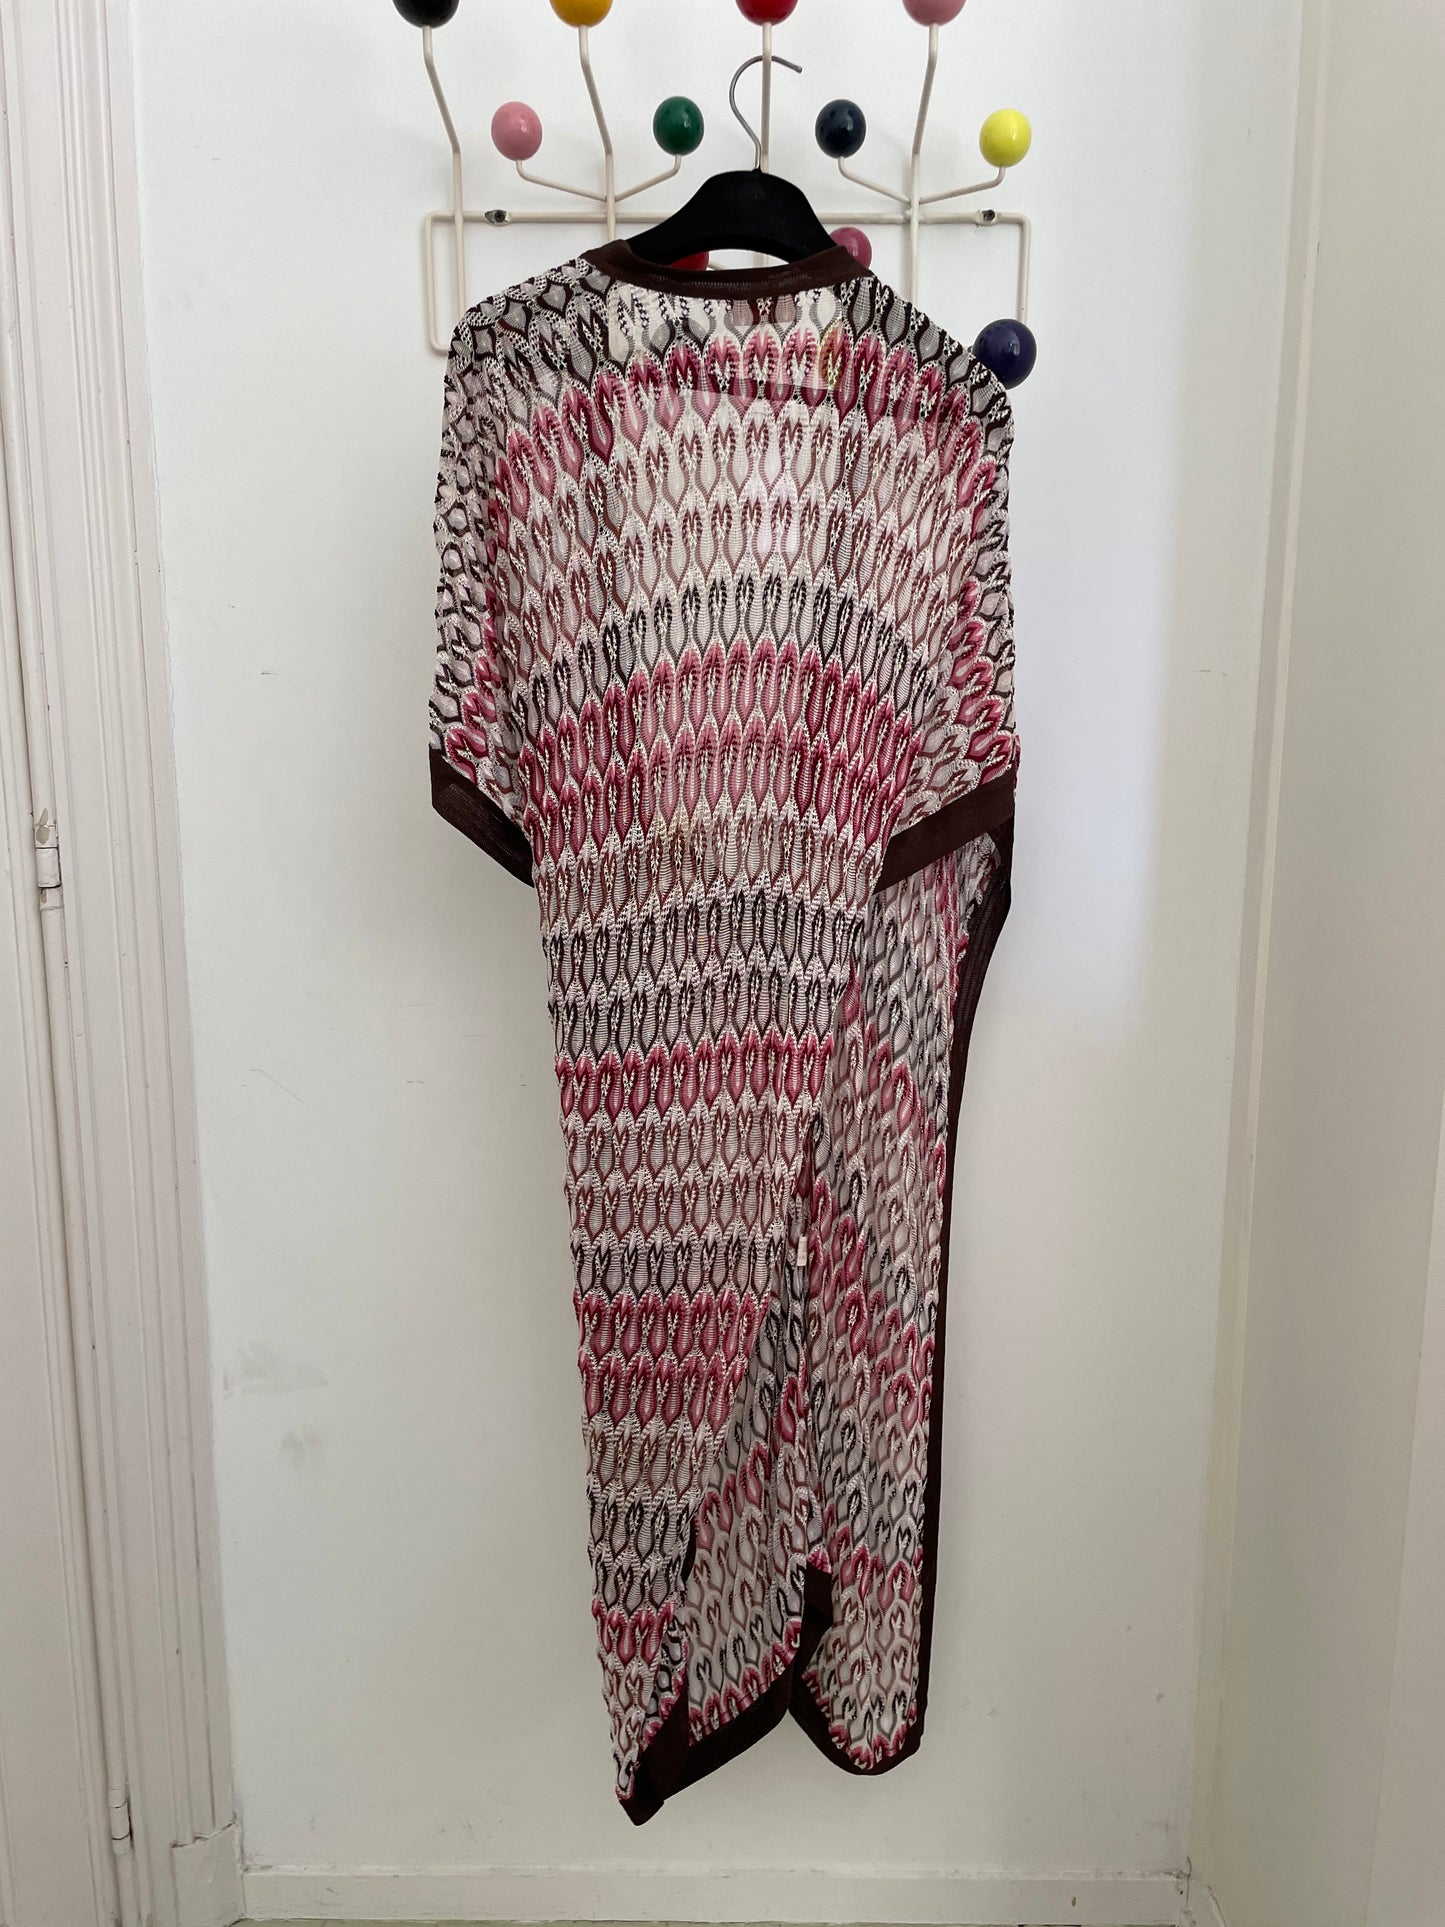 Missoni 90's knit wrap dress in shades of pink and brown